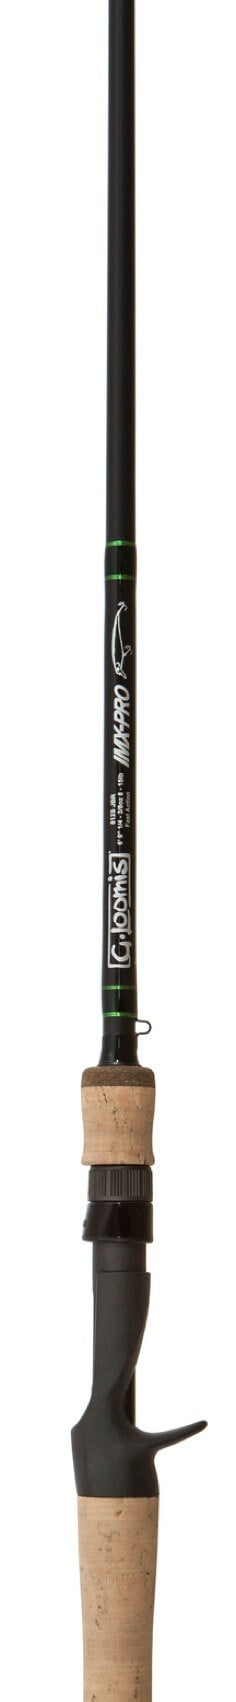 G. Loomis NRX Ned Rig Spinning Rod –